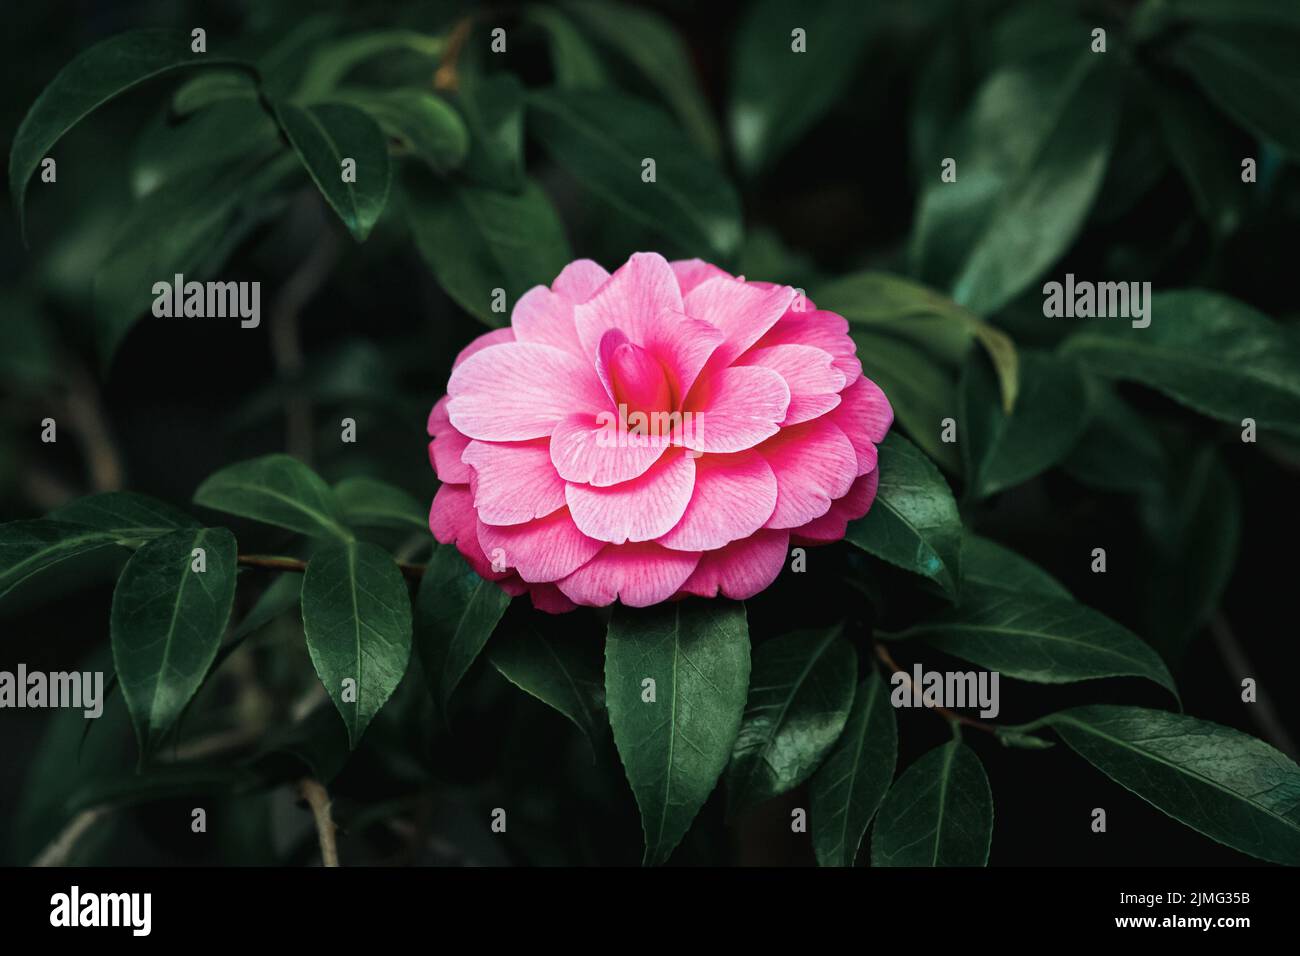 Japanese camellia (Camellia Japonica L.) formal double pink flower on a tree Stock Photo